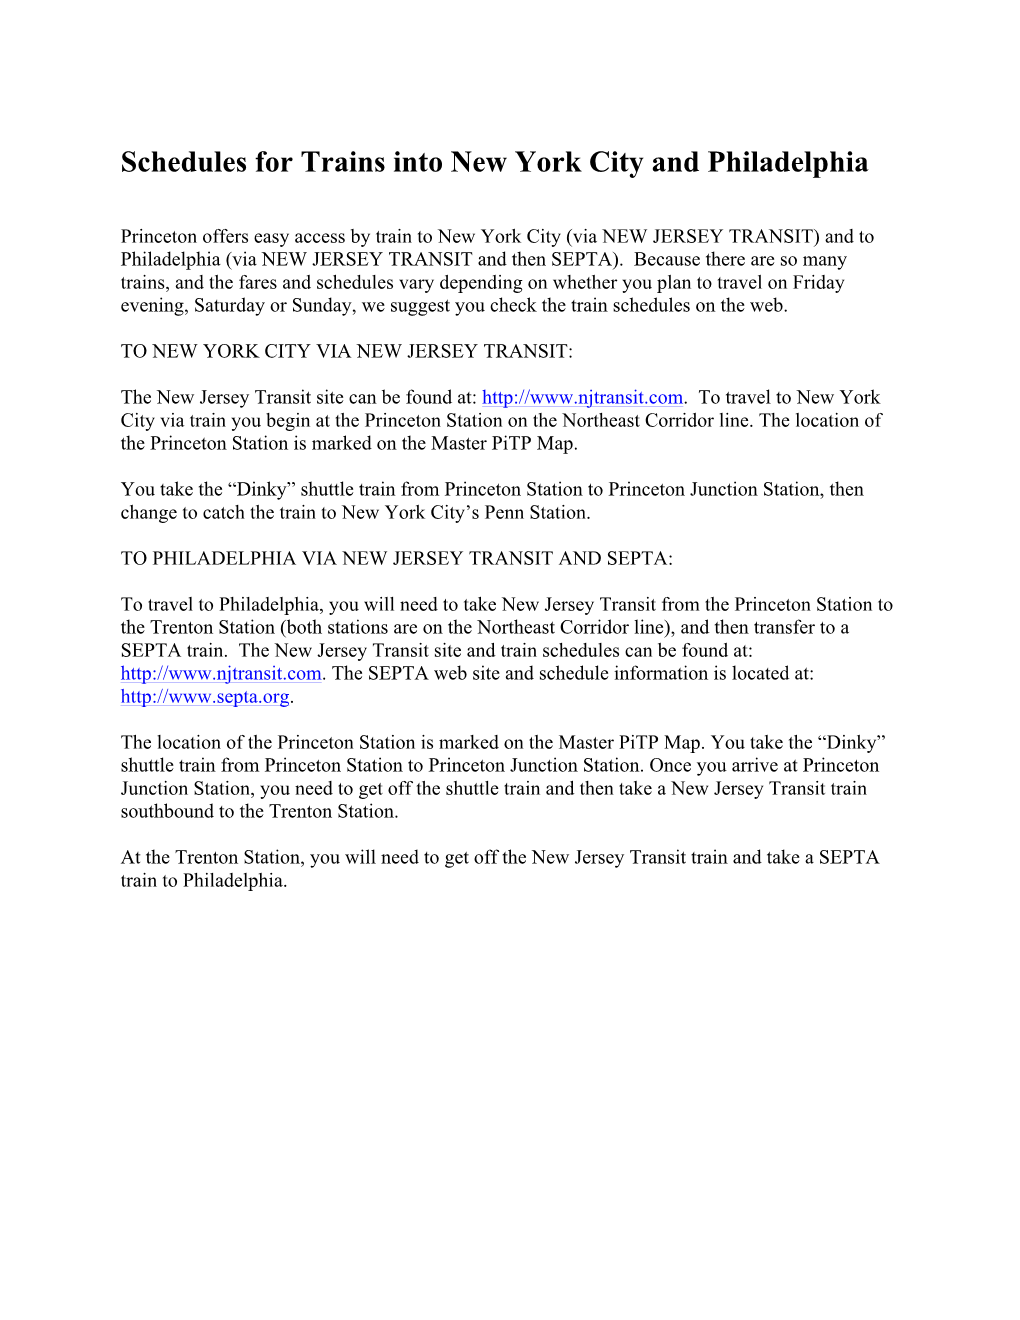 Schedules for Trains Into New York City and Philadelphia